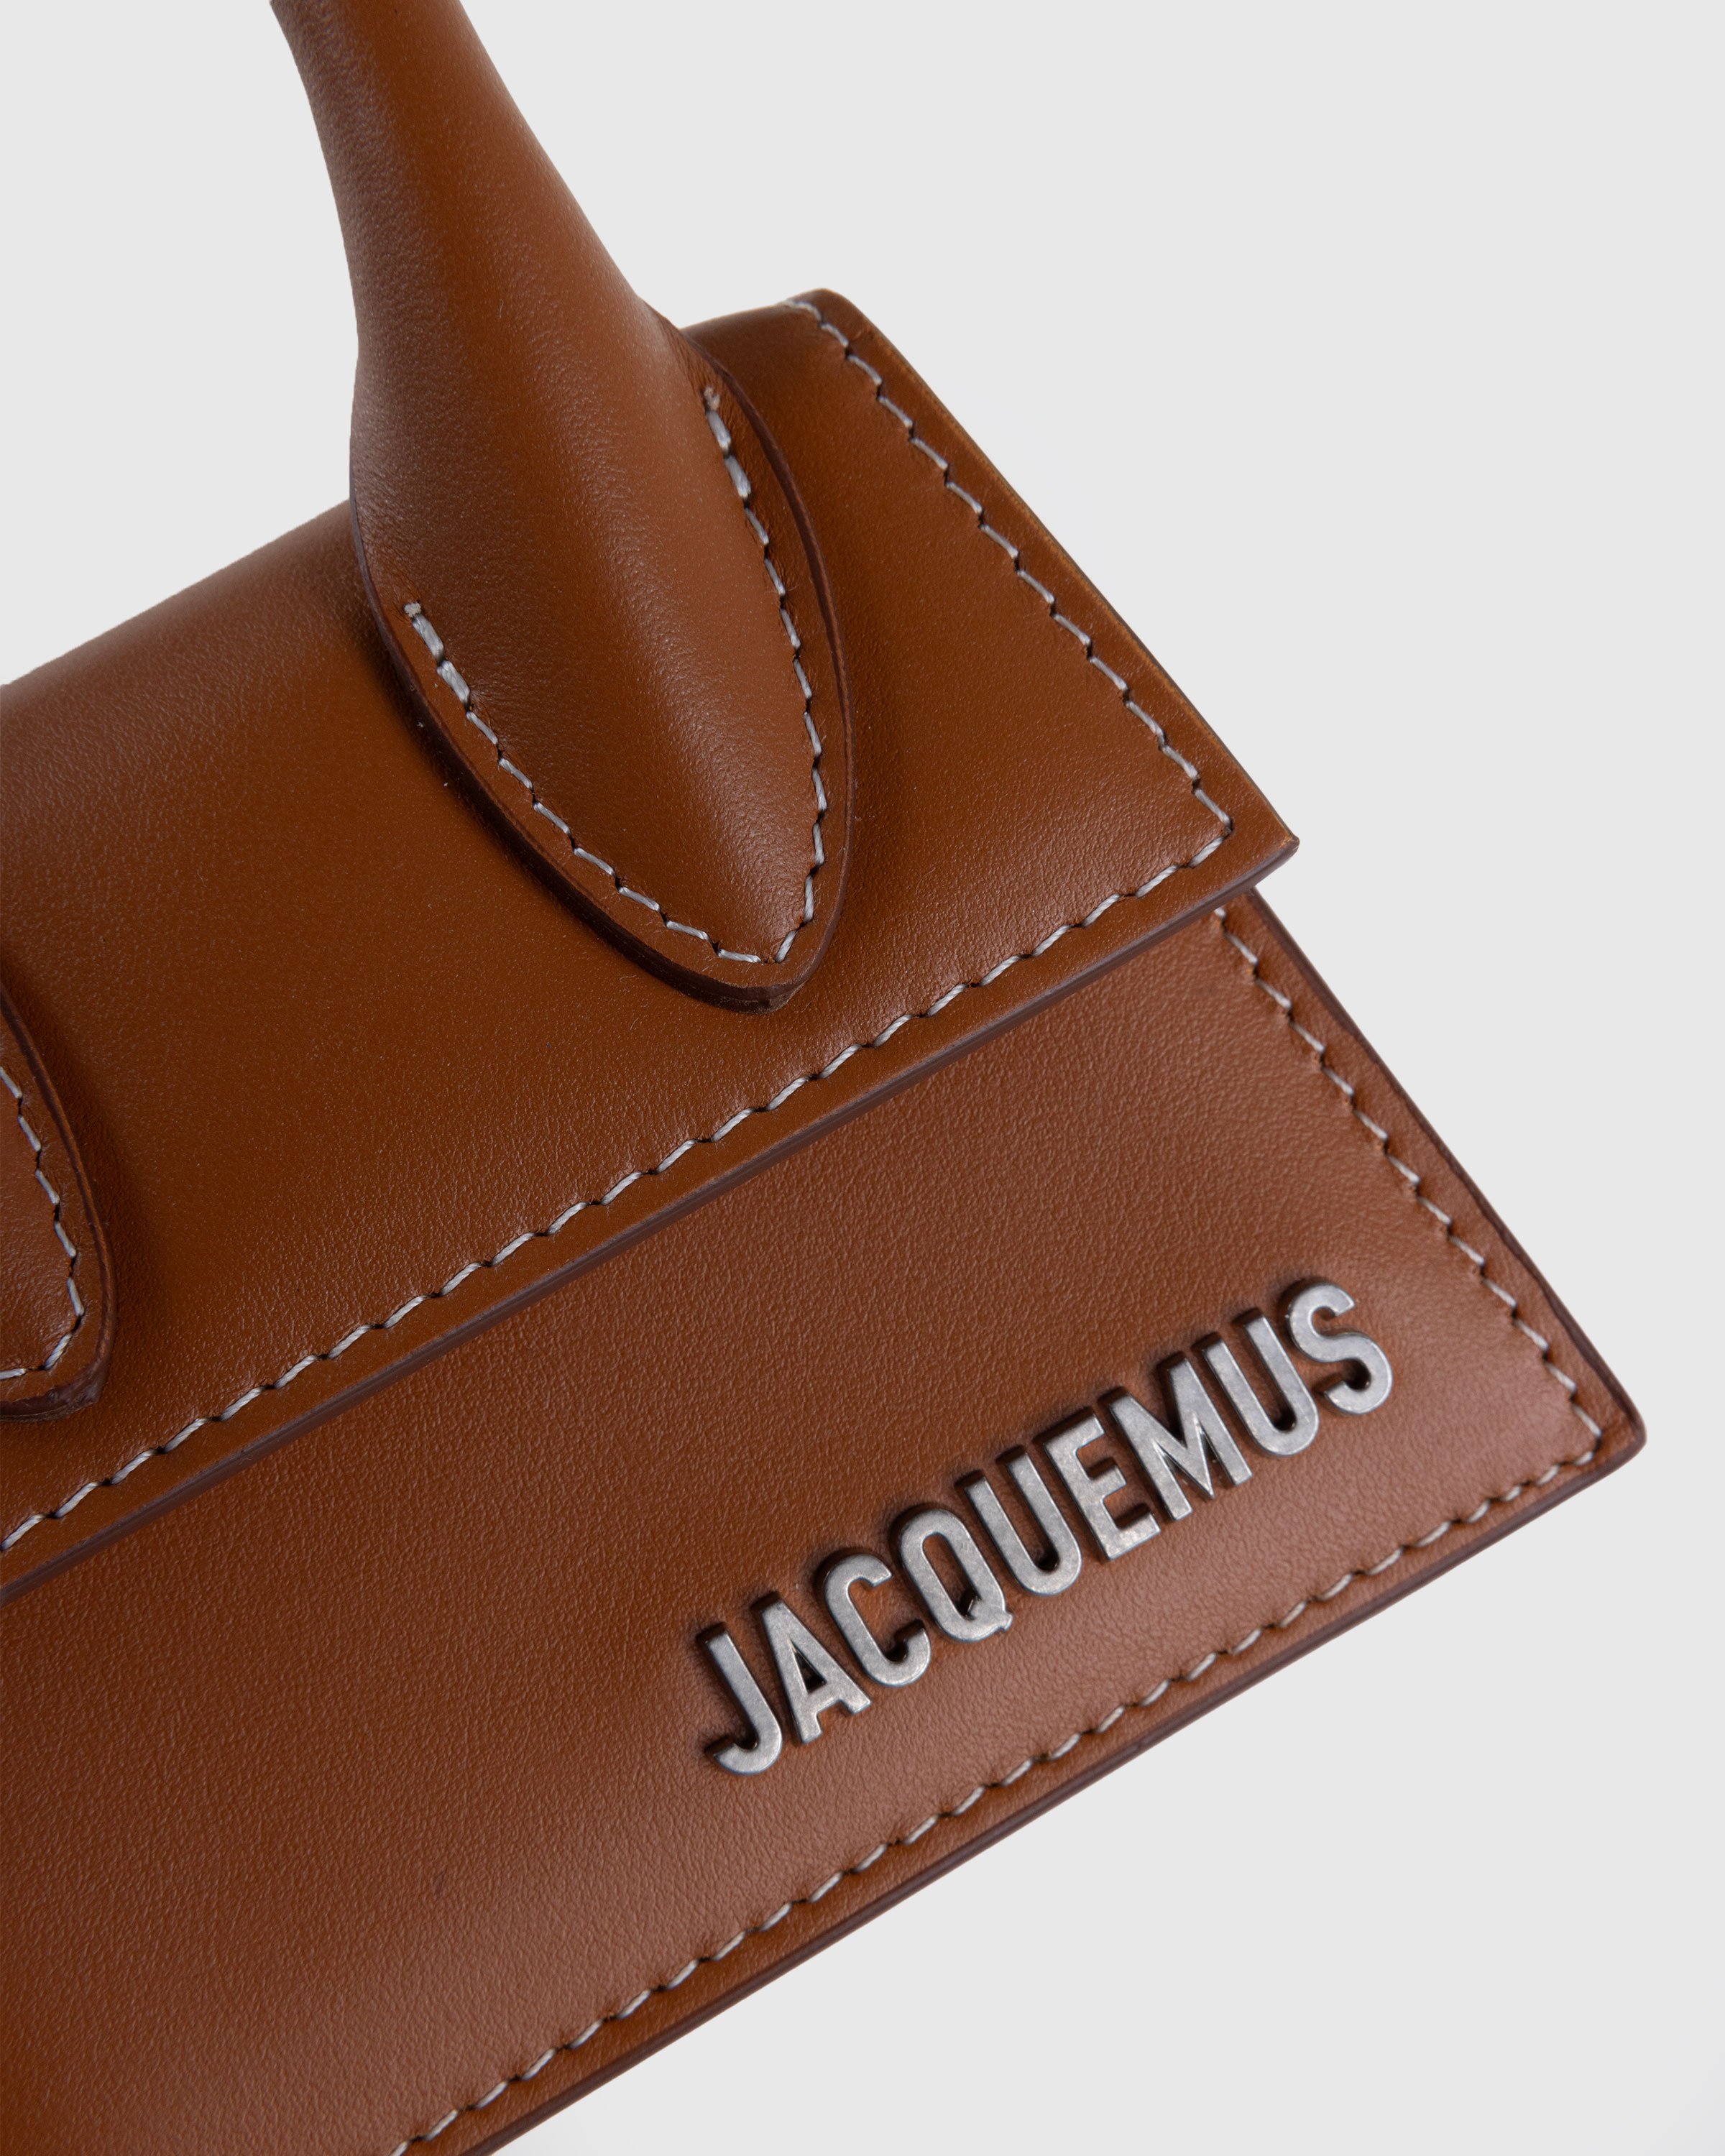 JACQUEMUS - LE CHIQUITO HOMME - Accessories - Brown - Image 6